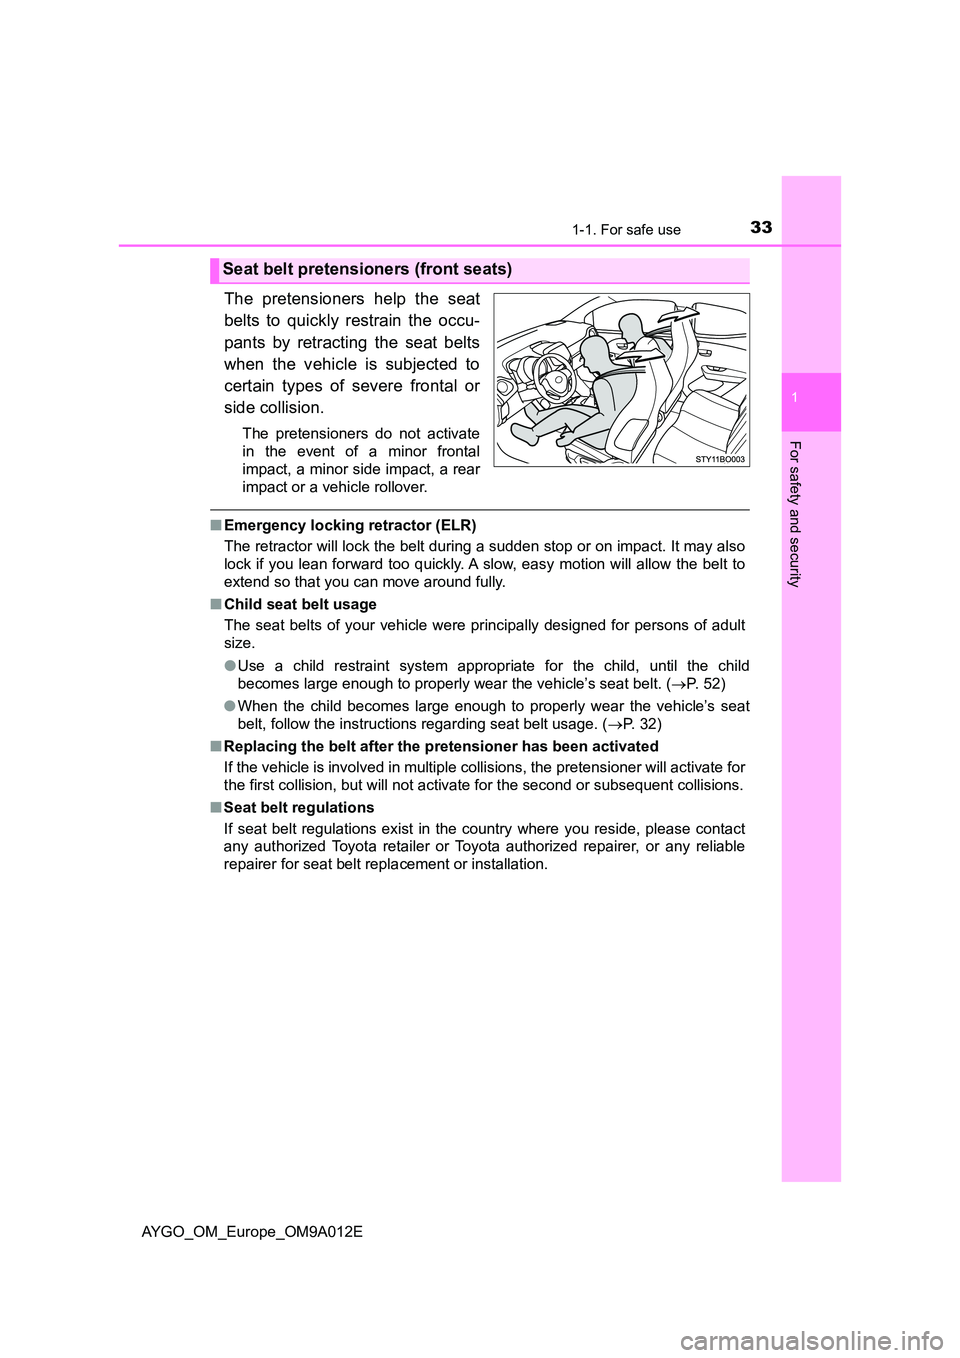 TOYOTA AYGO 2021  Owners Manual 331-1. For safe use
1
For safety and security
AYGO_OM_Europe_OM9A012E
The pretensioners help the seat 
belts to quickly restrain the occu- 
pants by retracting the seat belts 
when the vehicle is subj